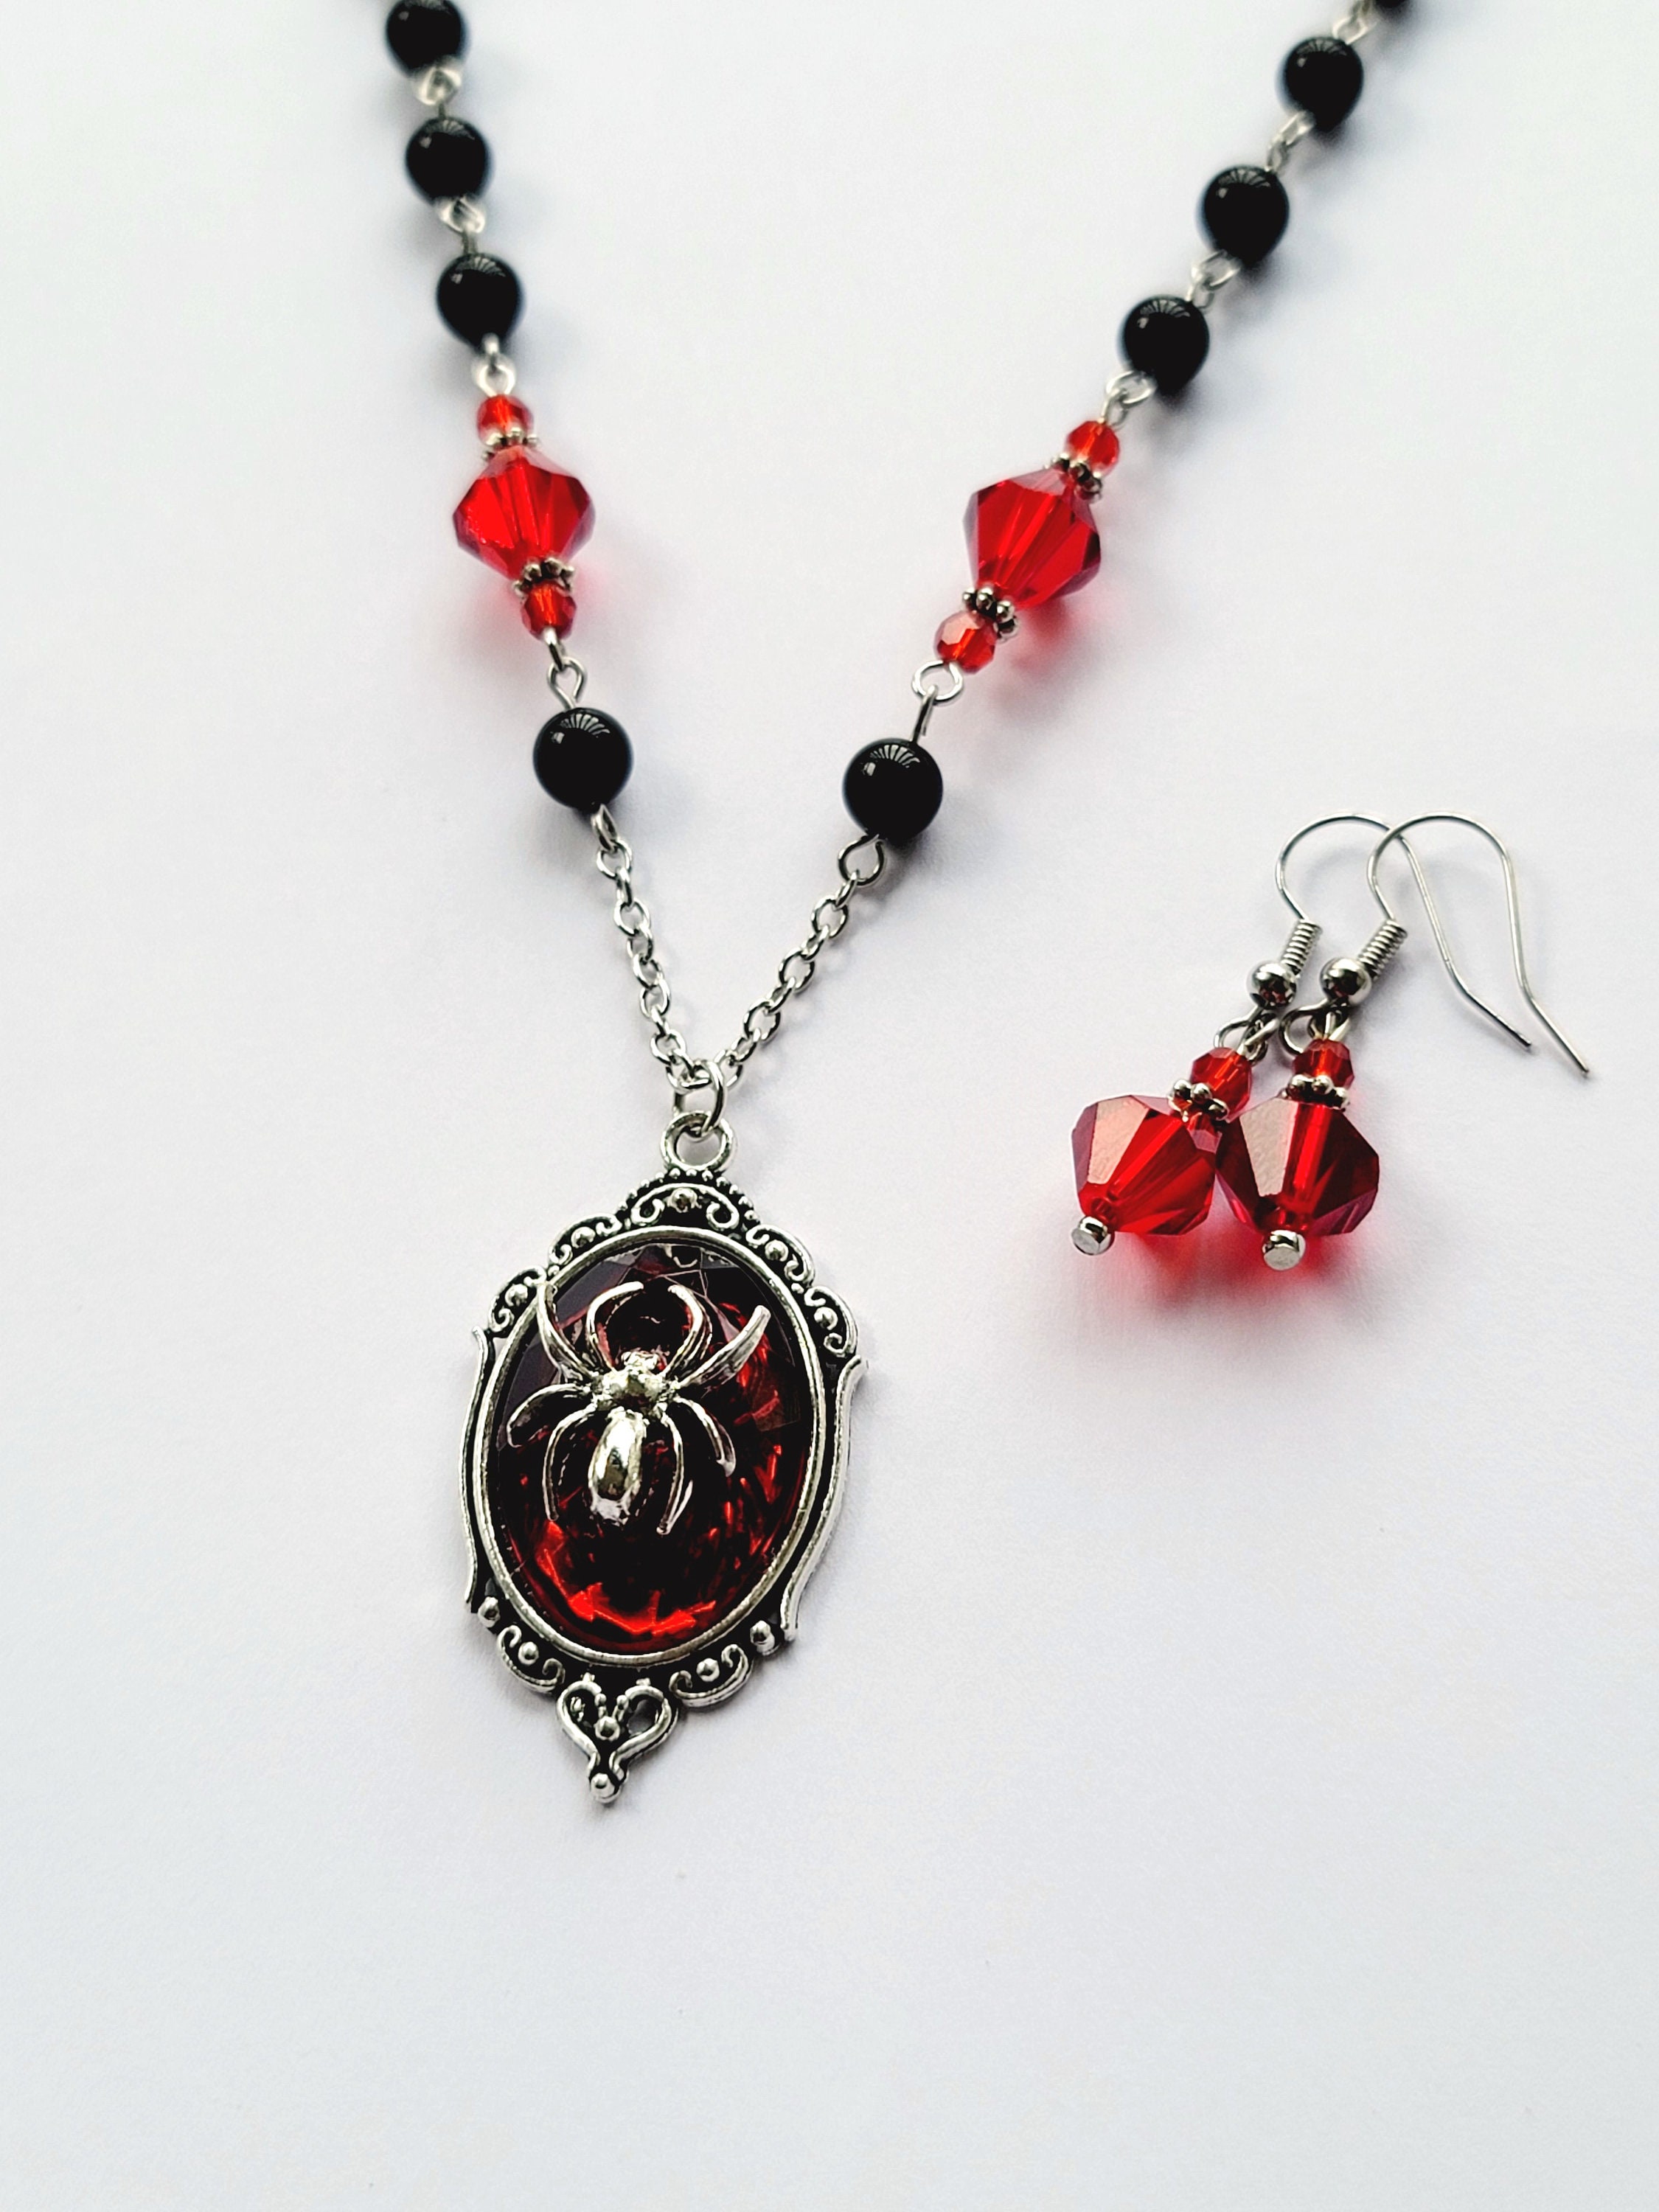 Vintage Gothic Spider Bat Gothic Pendant With Red Crystal And Black Beads  For Women 2023 Fashion Jewelry For Parties And Events From Motoitems,  $12.57